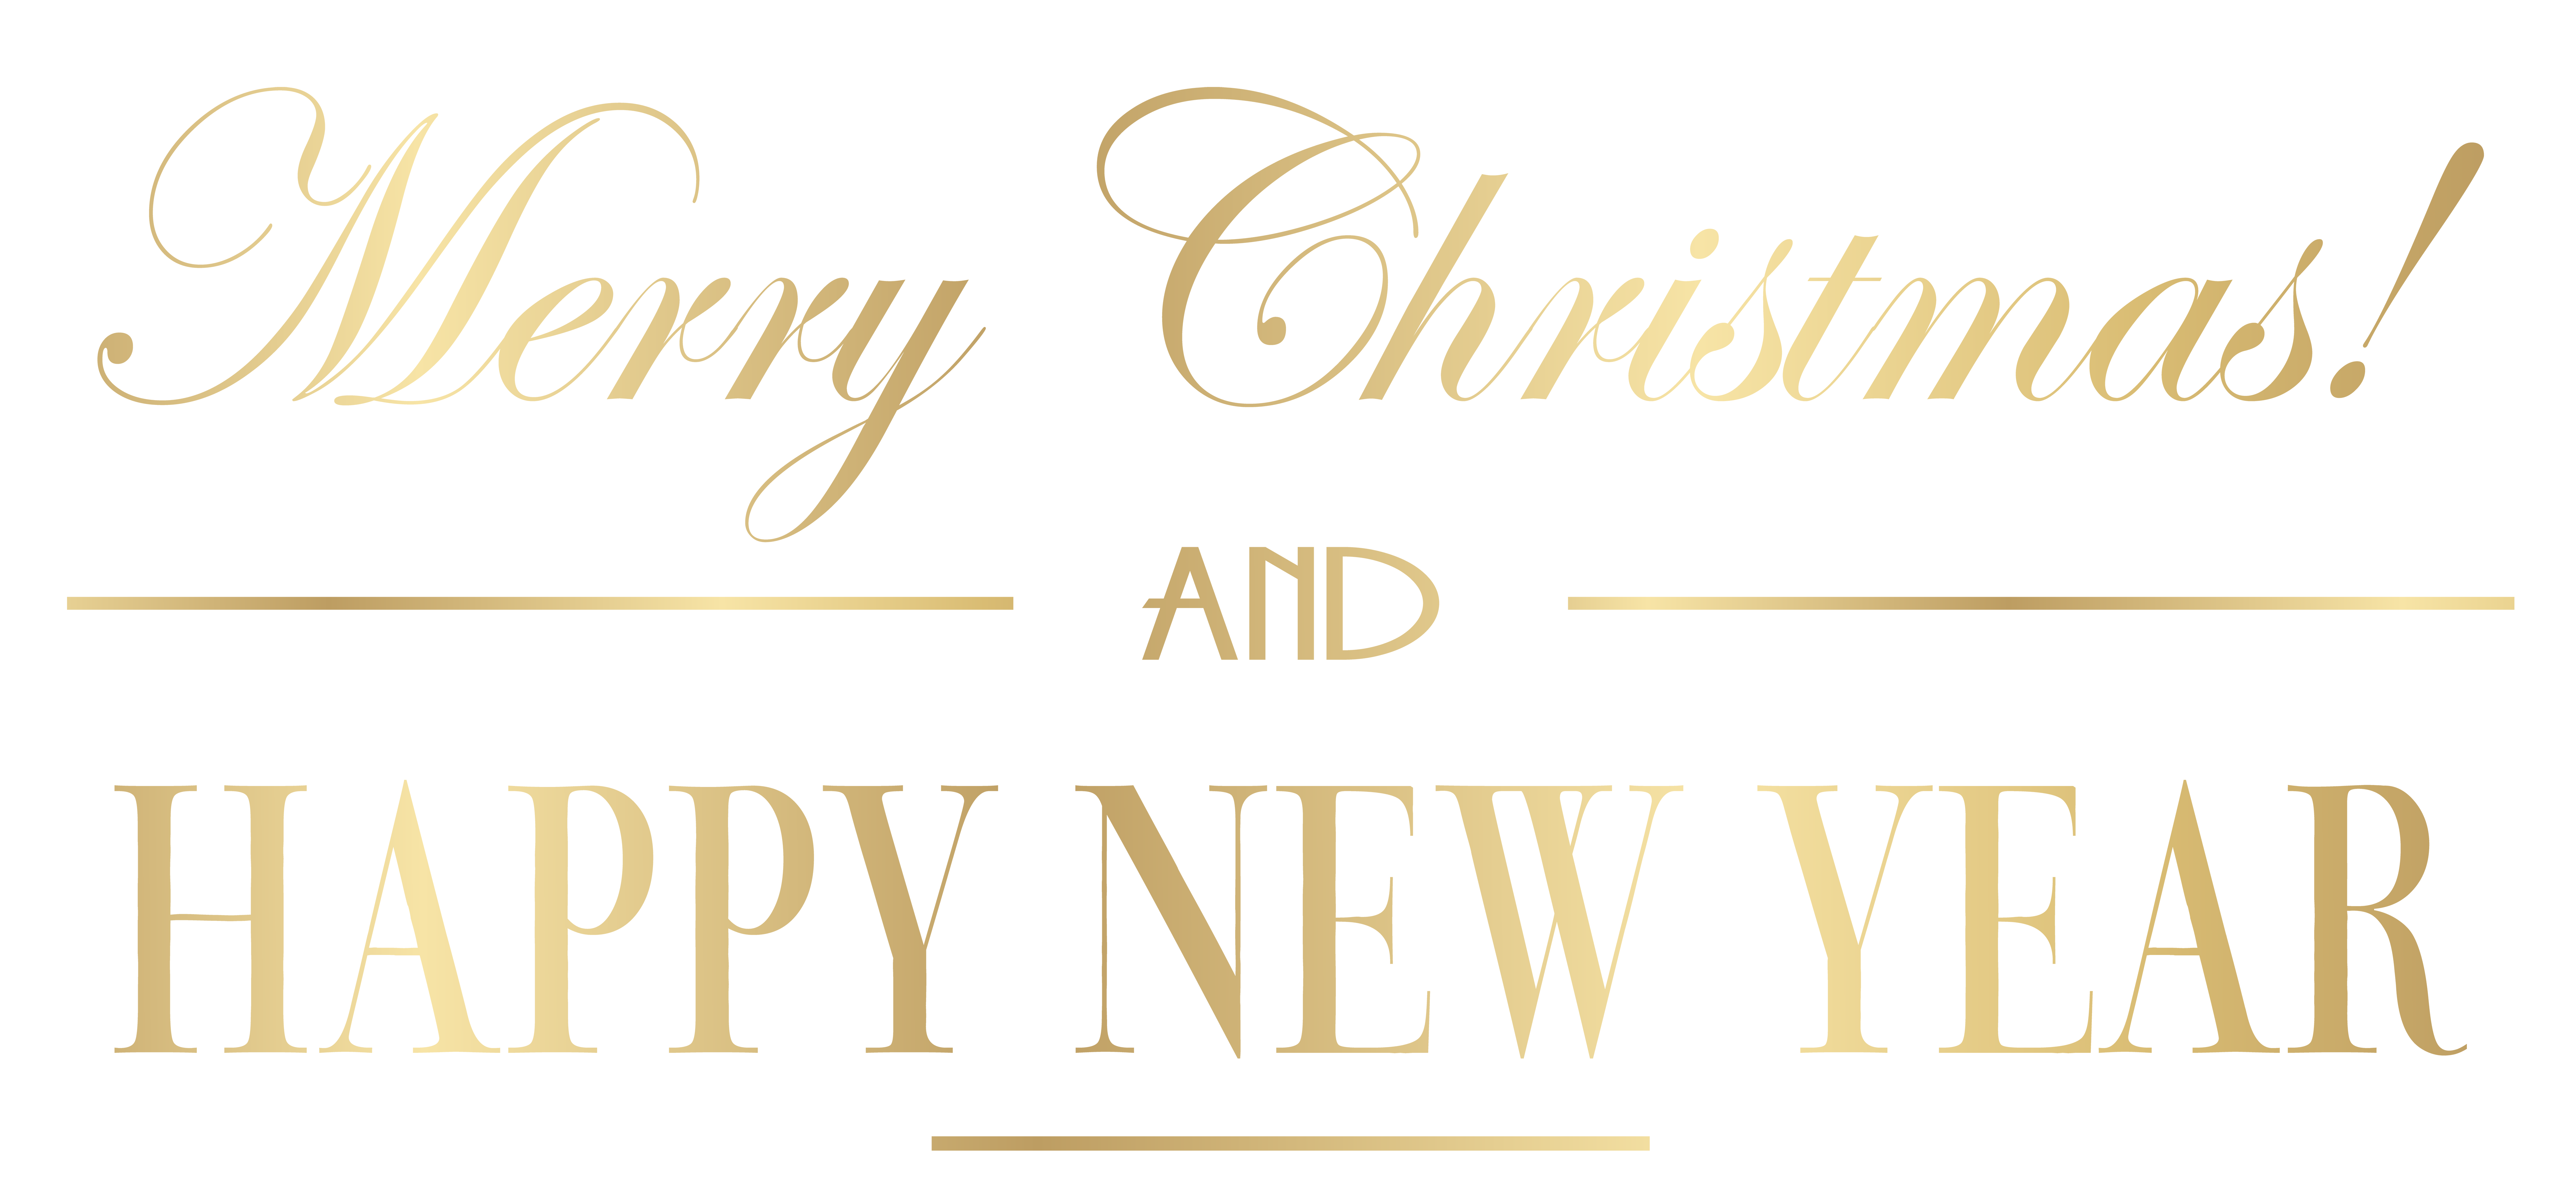 merry christmas and happy new year images clip art